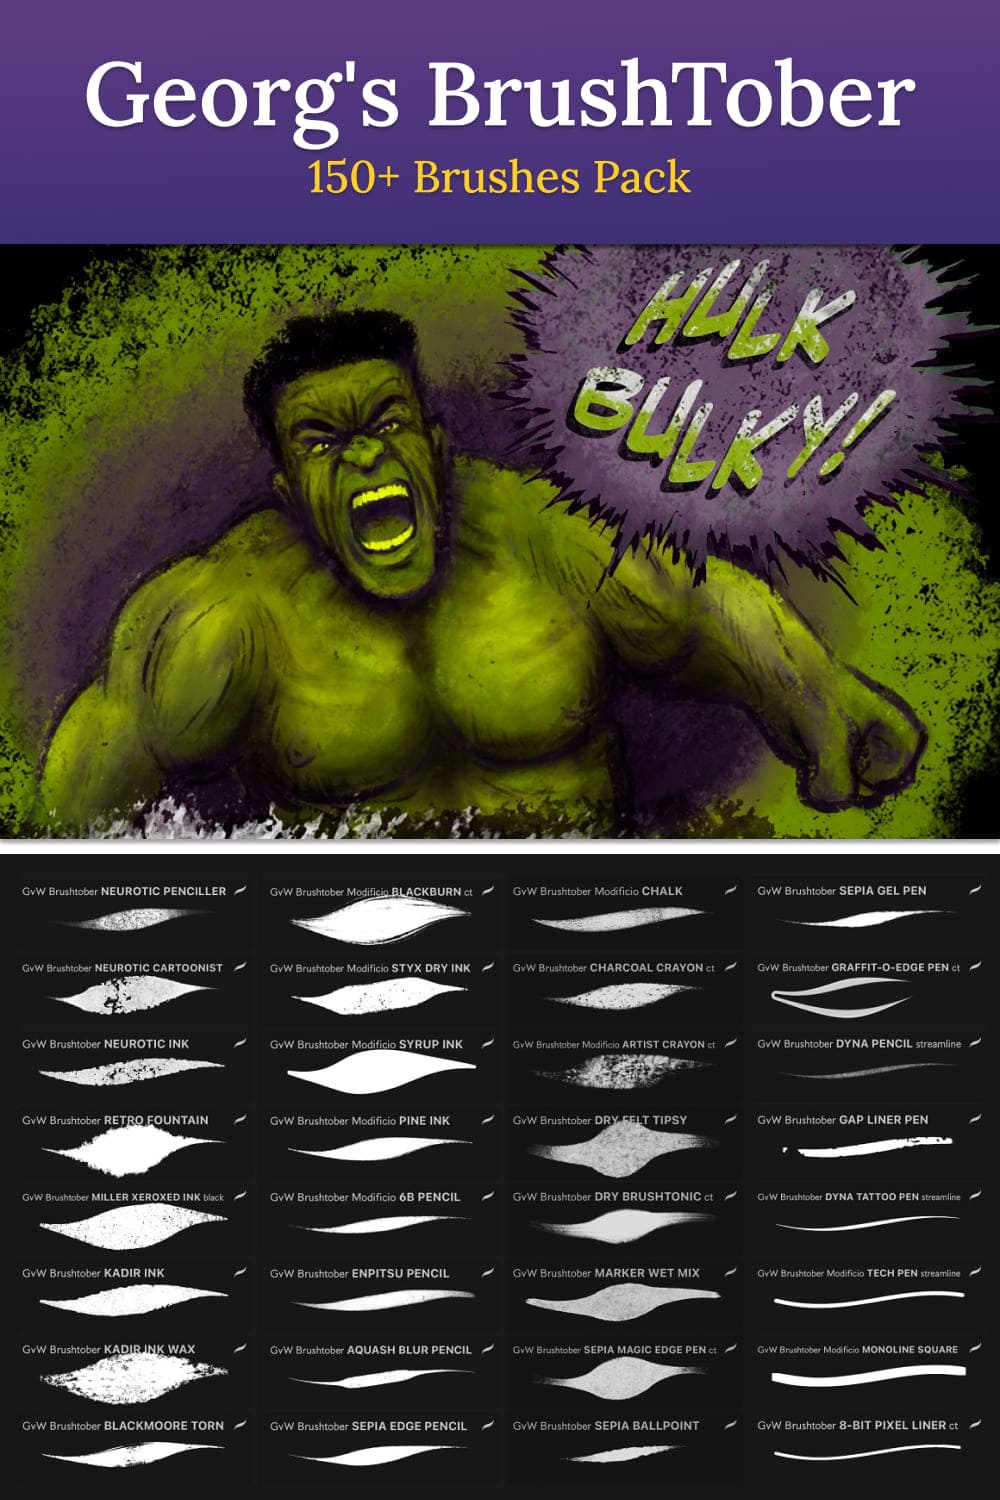 The green hulk is drawn with brushes.